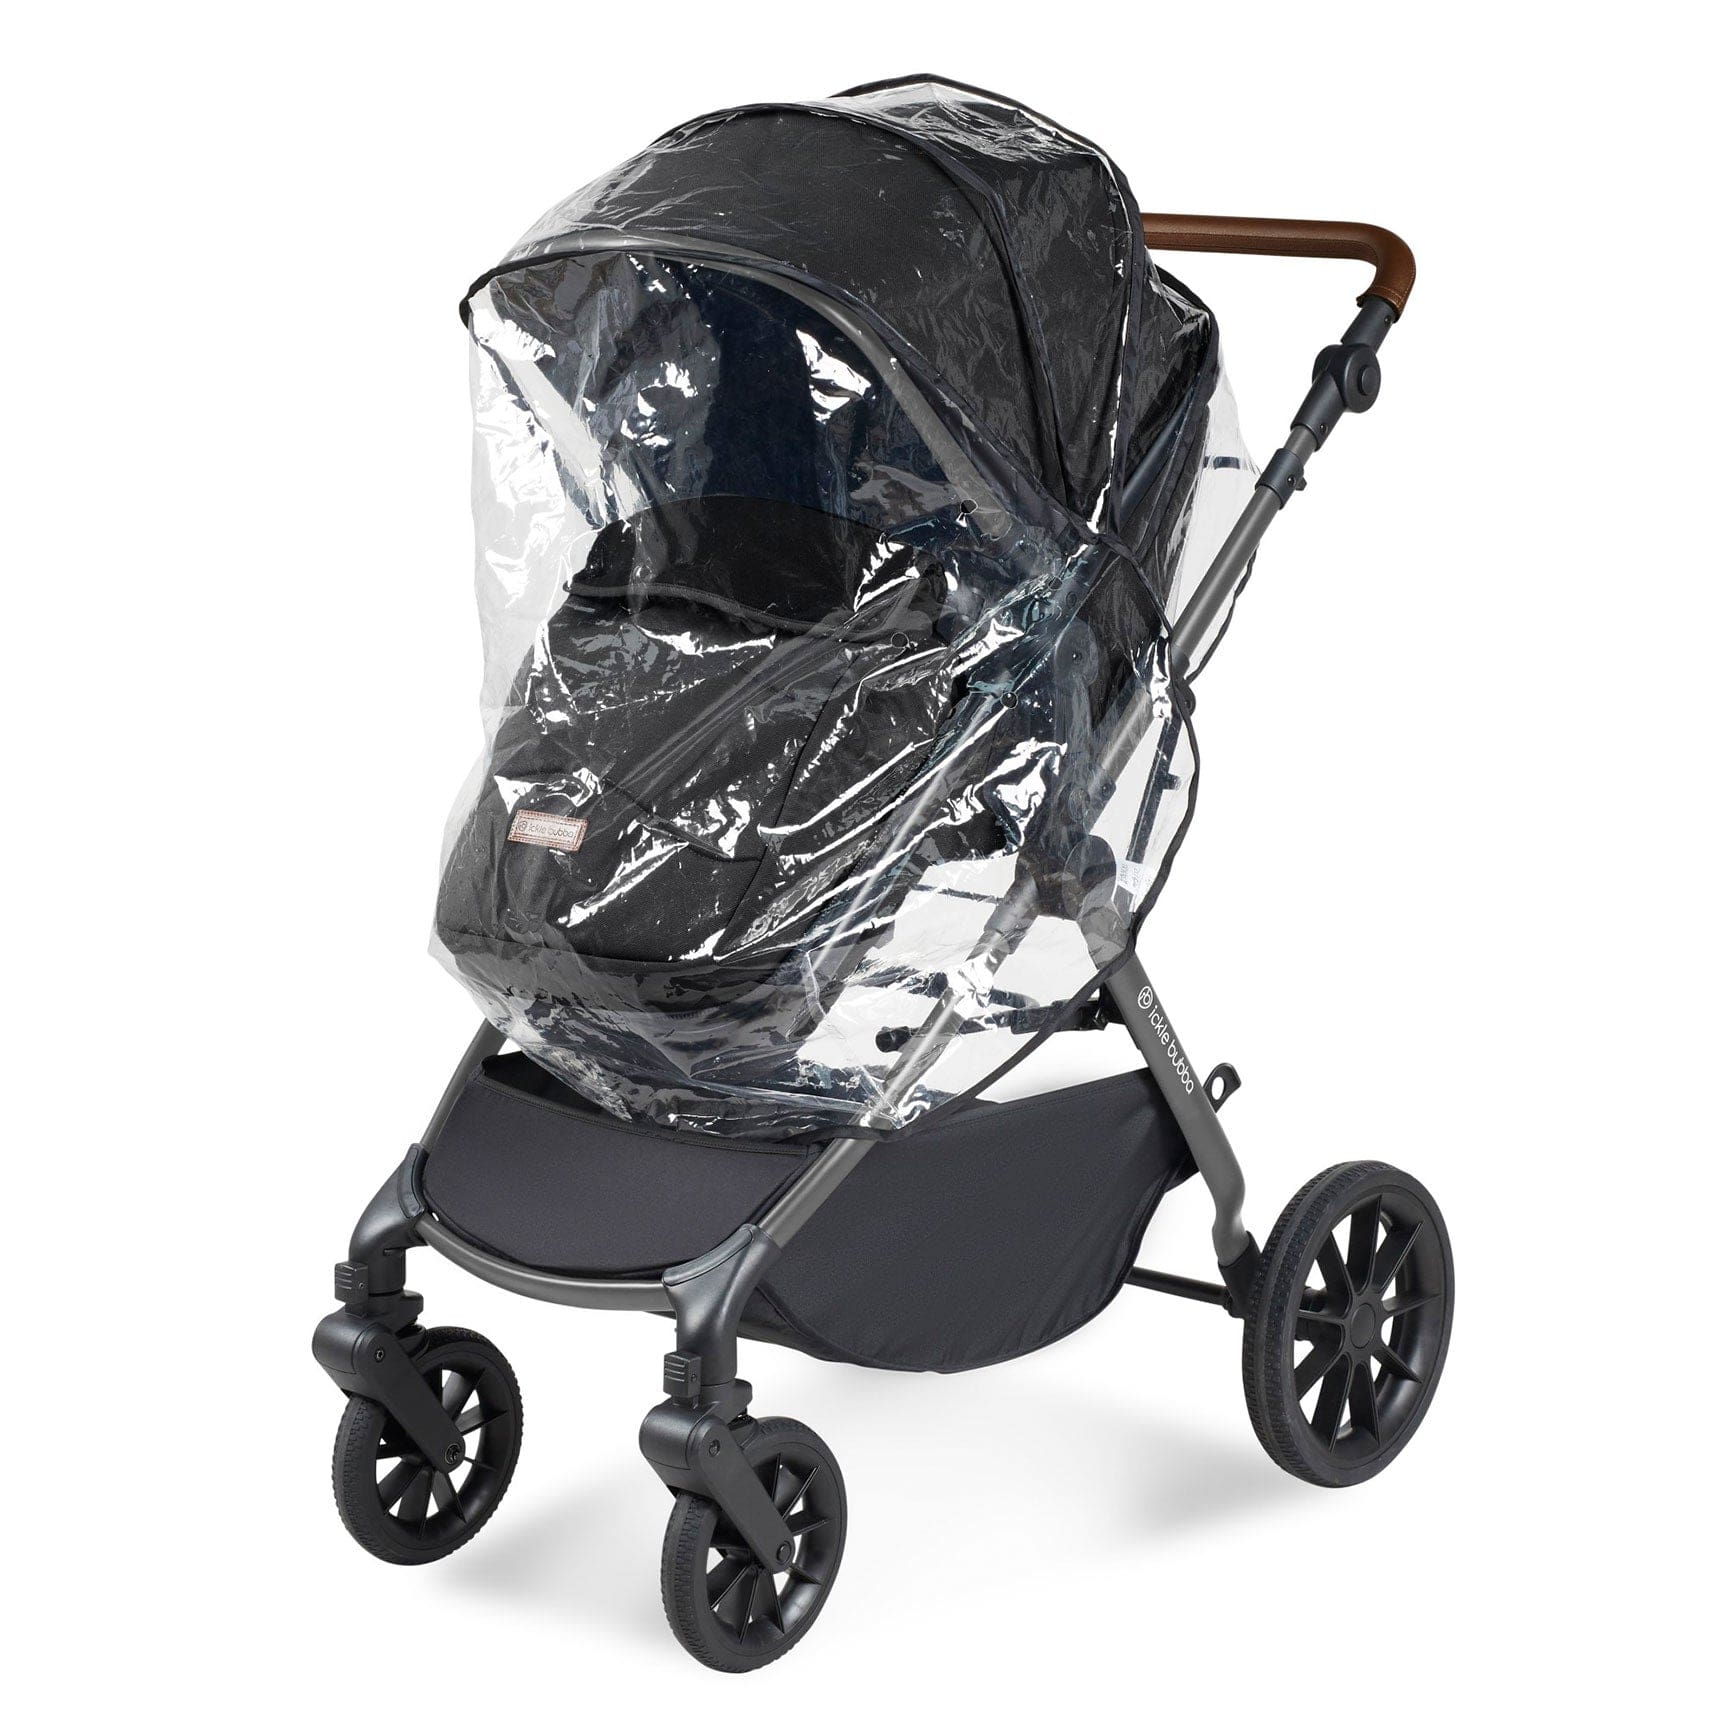 Ickle Bubba travel systems Ickle Bubba Cosmo All-in-One I-Size Travel System with Isofix Base - Black/Gun Metal 10-007-300-135